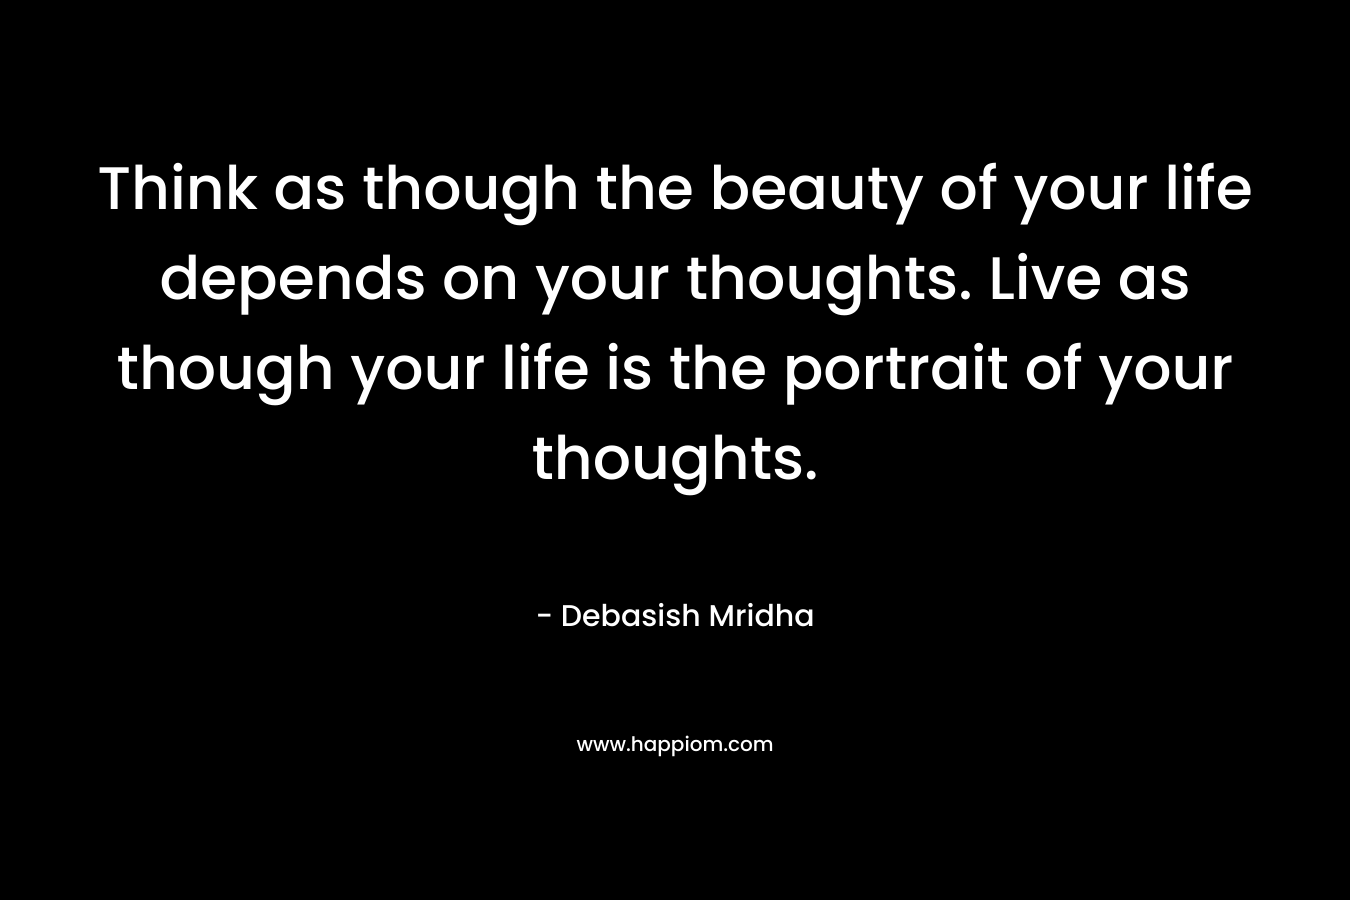 Think as though the beauty of your life depends on your thoughts. Live as though your life is the portrait of your thoughts.